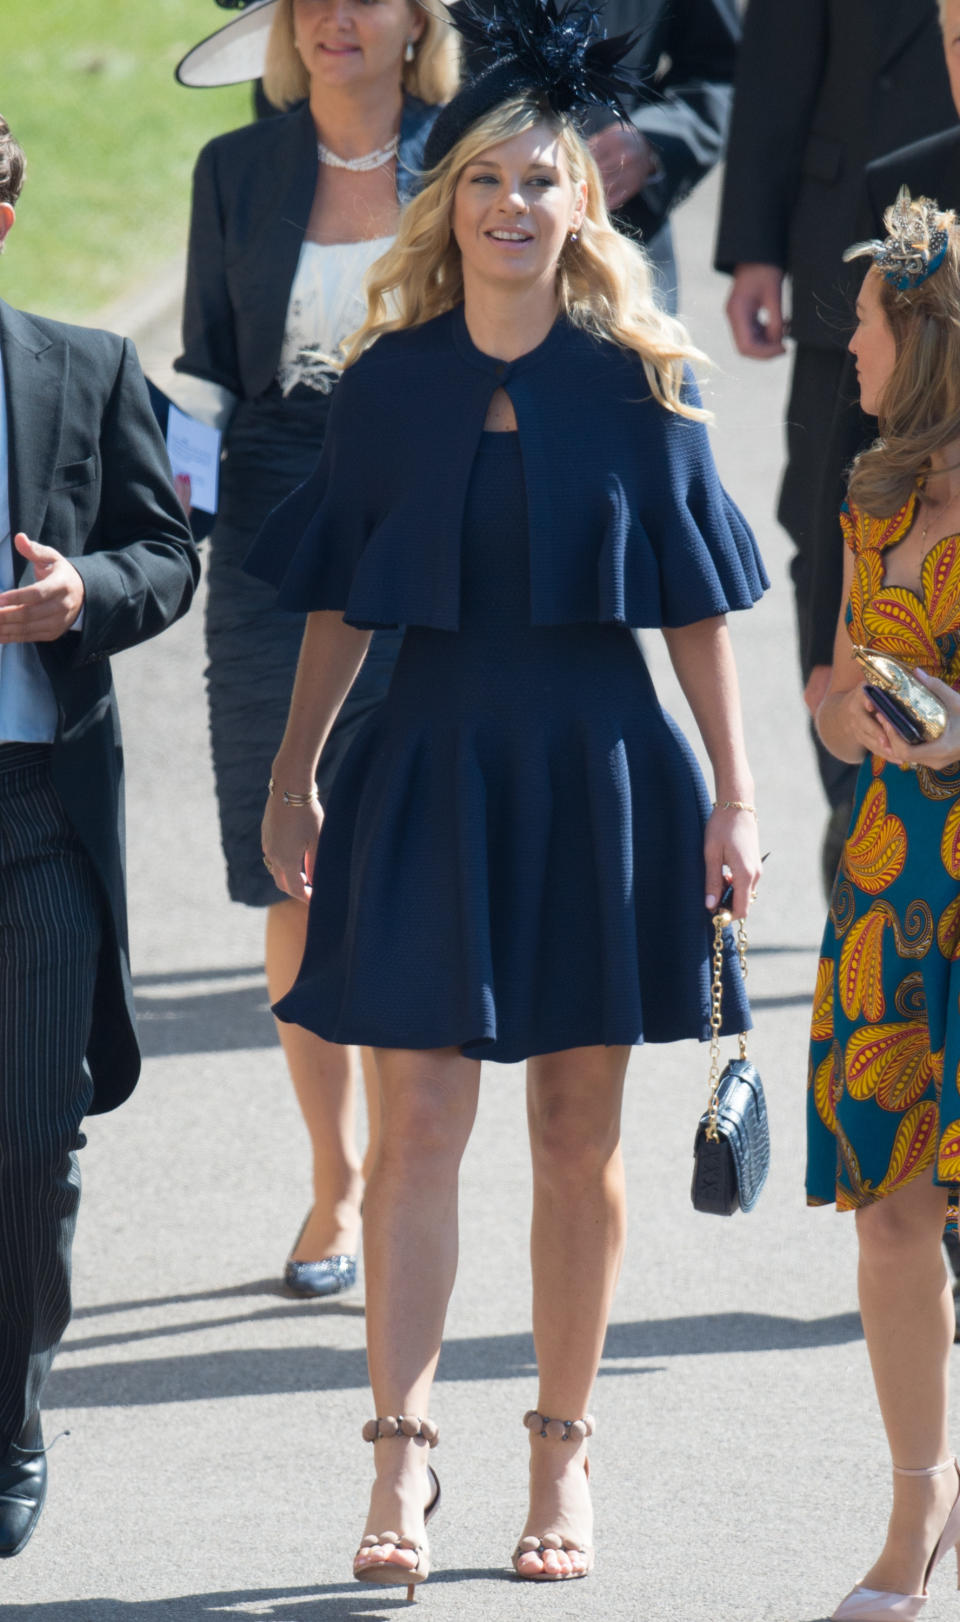 Chelsy Davy attends the wedding of Prince Harry and Meghan Markle